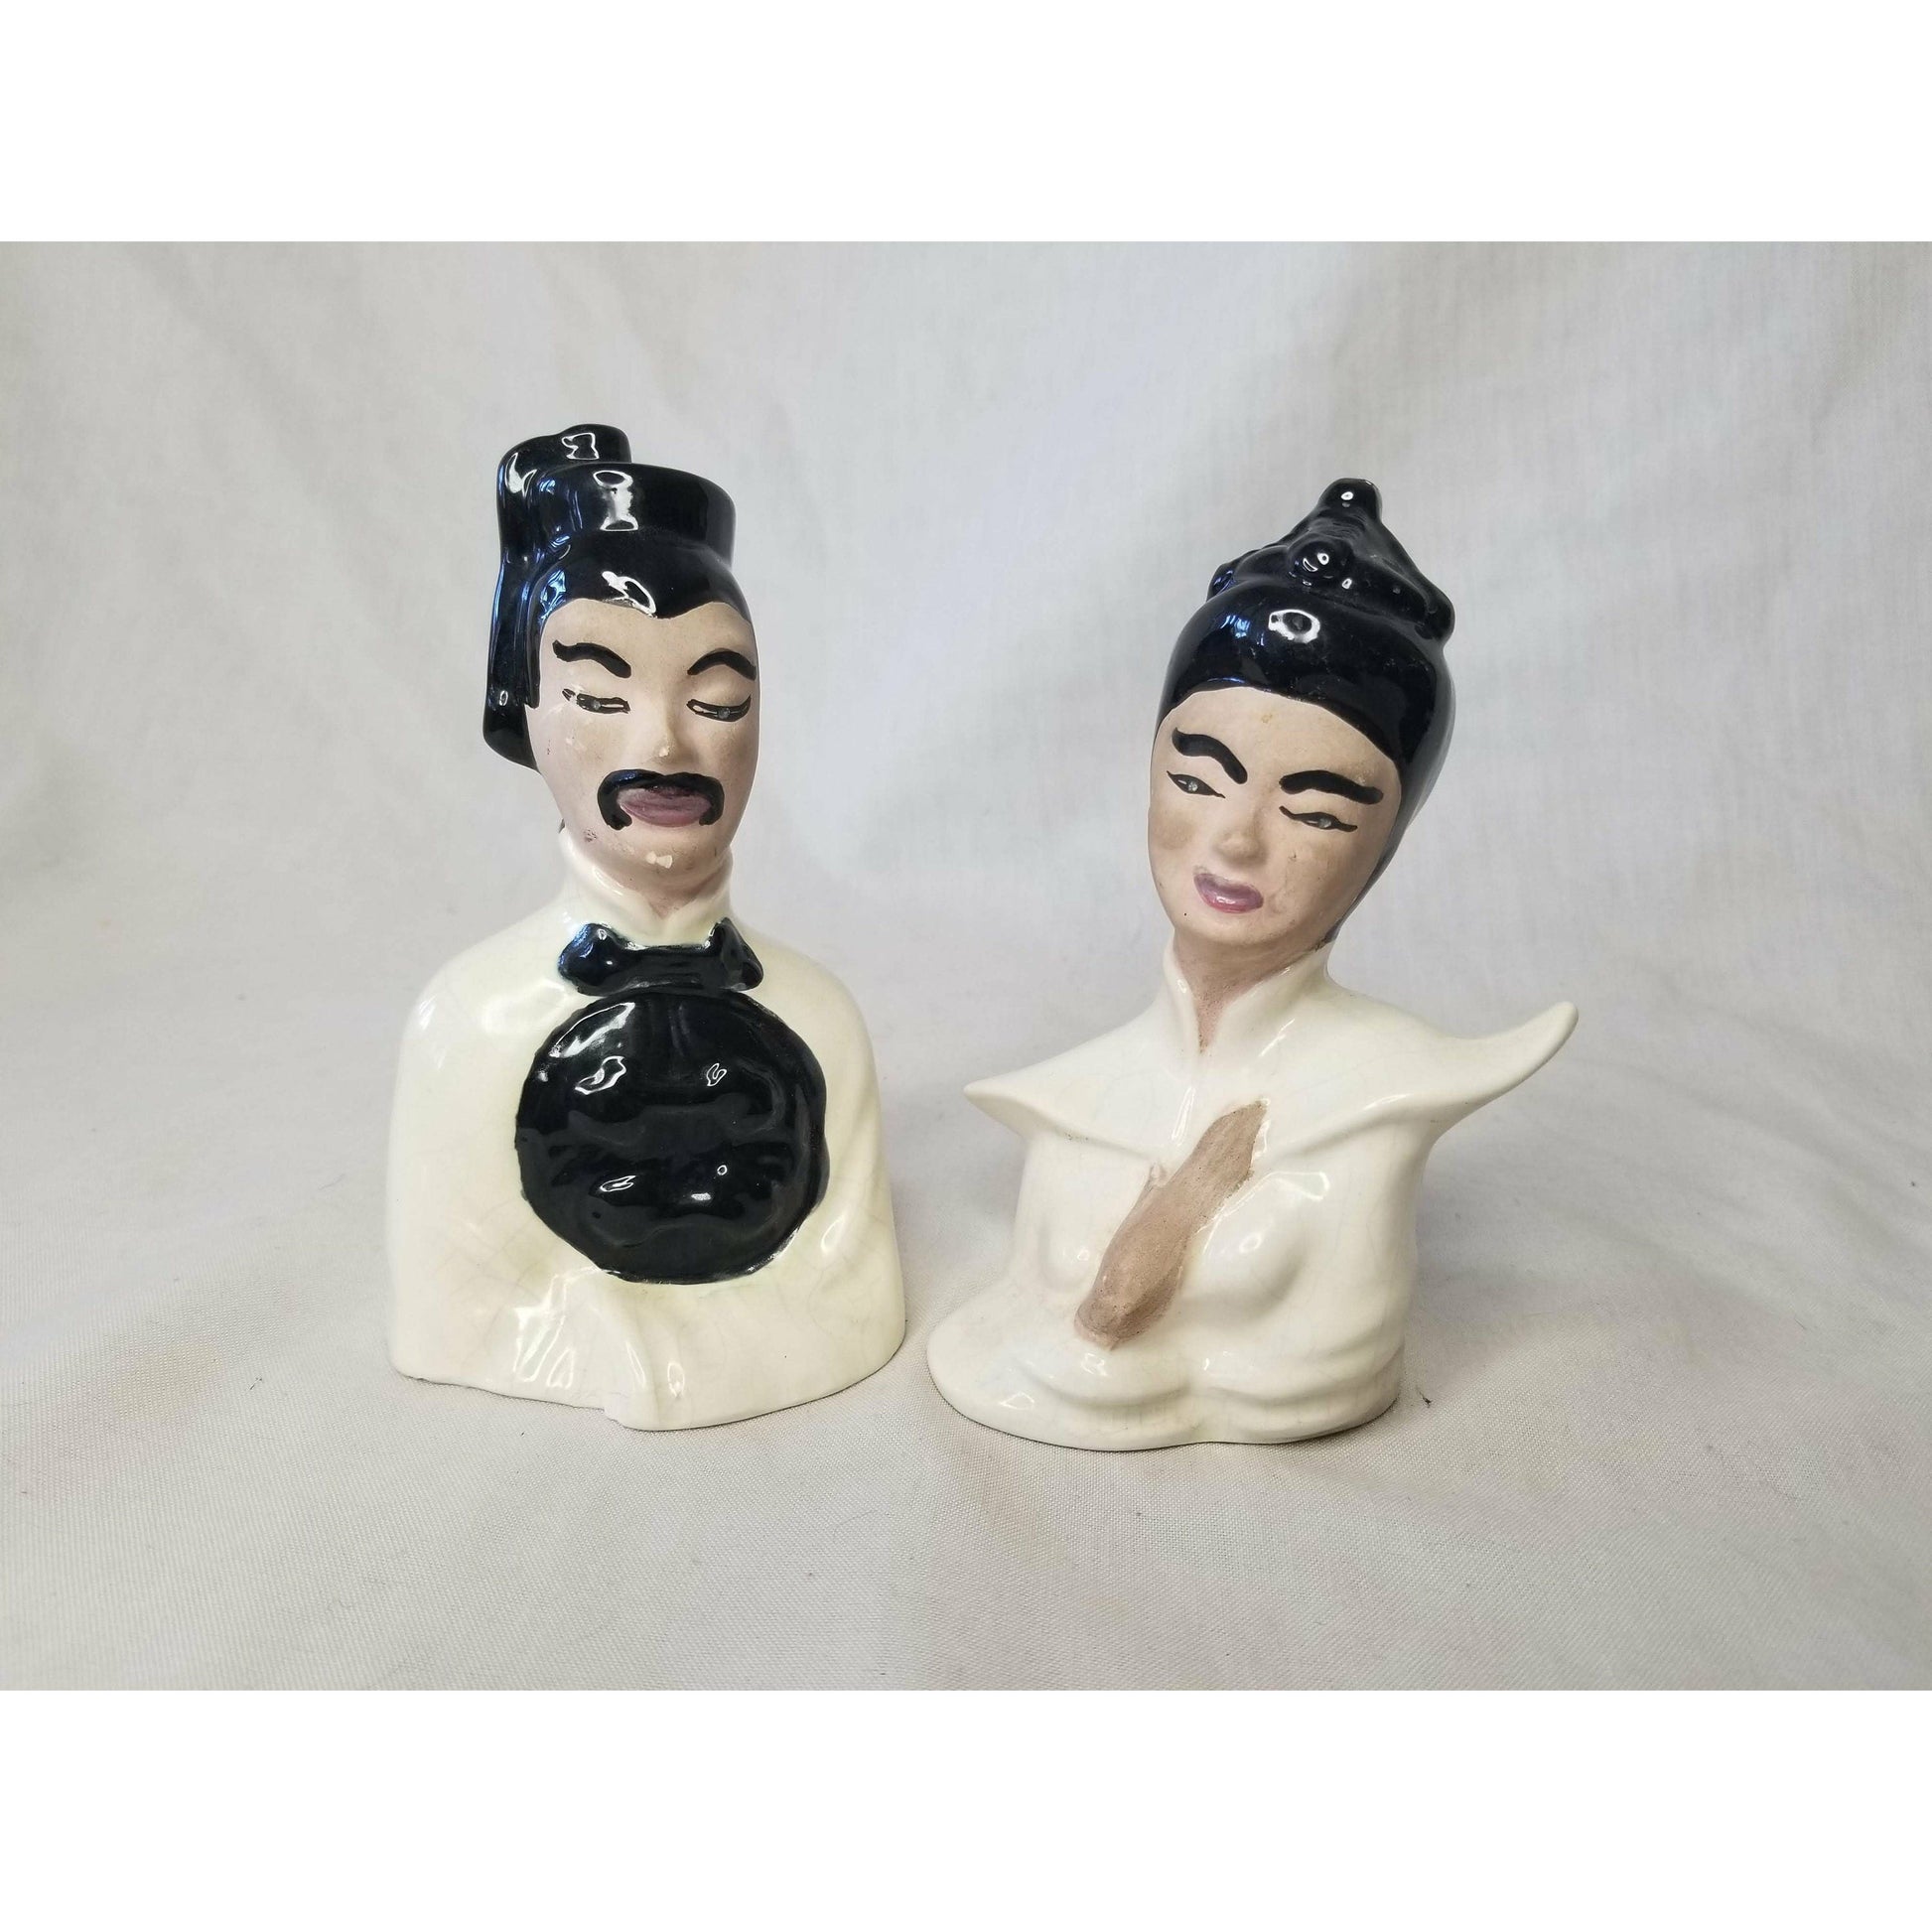 Thai Chinese Asian Porcelain Man & Woman Head Busts ~ Mid Century Modern 1950s ~ Collectible Figurine Set of 2